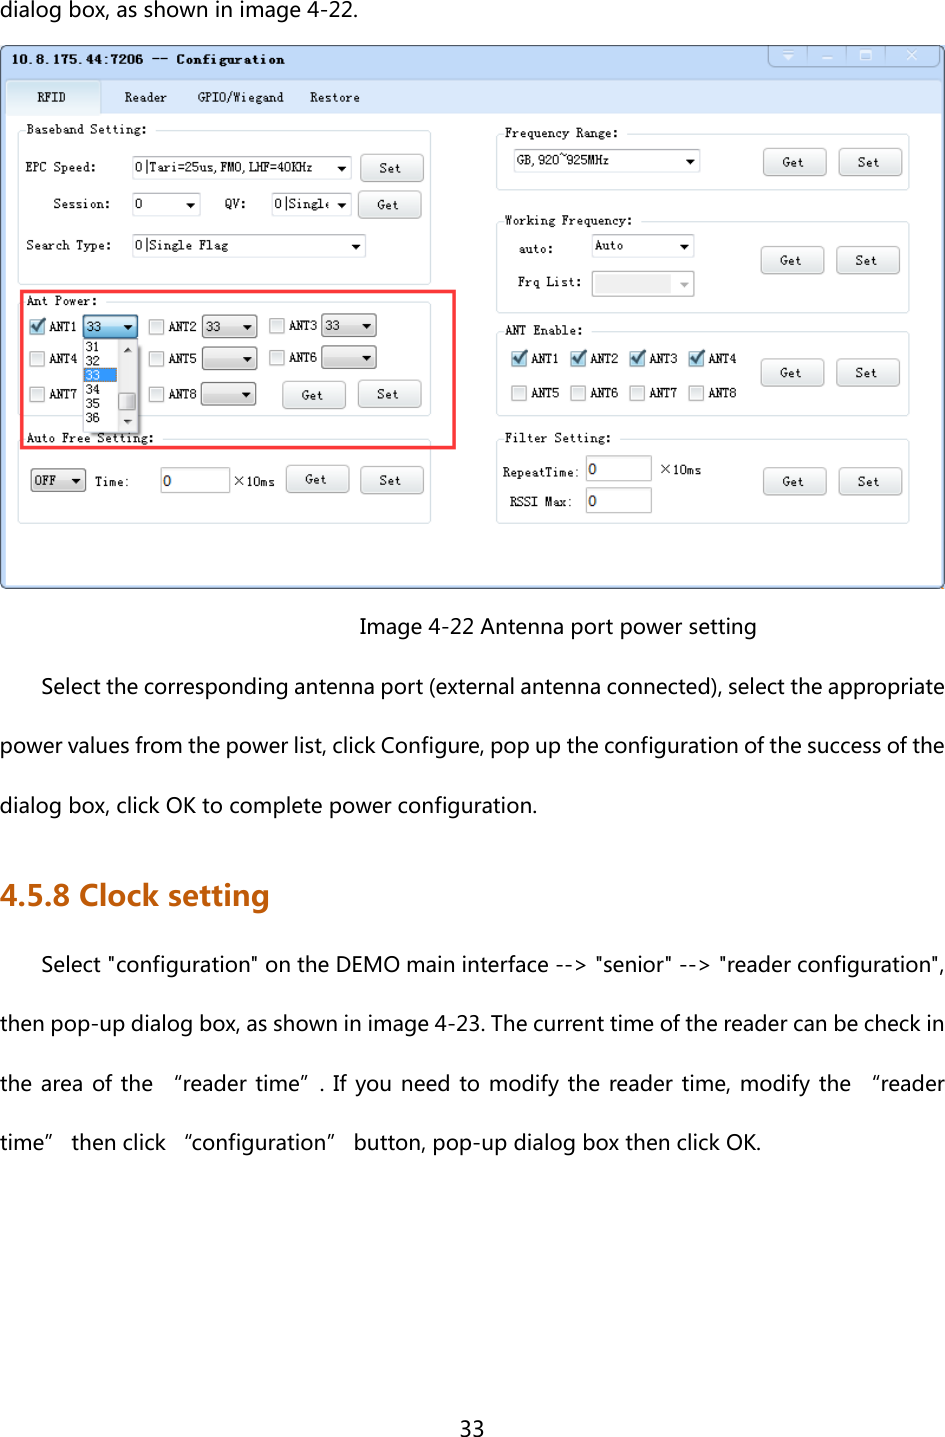  33  dialog box, as shown in image 4-22.                                Image 4-22 Antenna port power setting Select the corresponding antenna port (external antenna connected), select the appropriate power values from the power list, click Configure, pop up the configuration of the success of the dialog box, click OK to complete power configuration. 4.5.8 Clock setting Select &quot;configuration&quot; on the DEMO main interface --&gt; &quot;senior&quot; --&gt; &quot;reader configuration&quot;, then pop-up dialog box, as shown in image 4-23. The current time of the reader can be check in the area of the “reader time”. If you need to modify the reader time, modify the “reader time” then click “configuration” button, pop-up dialog box then click OK.    